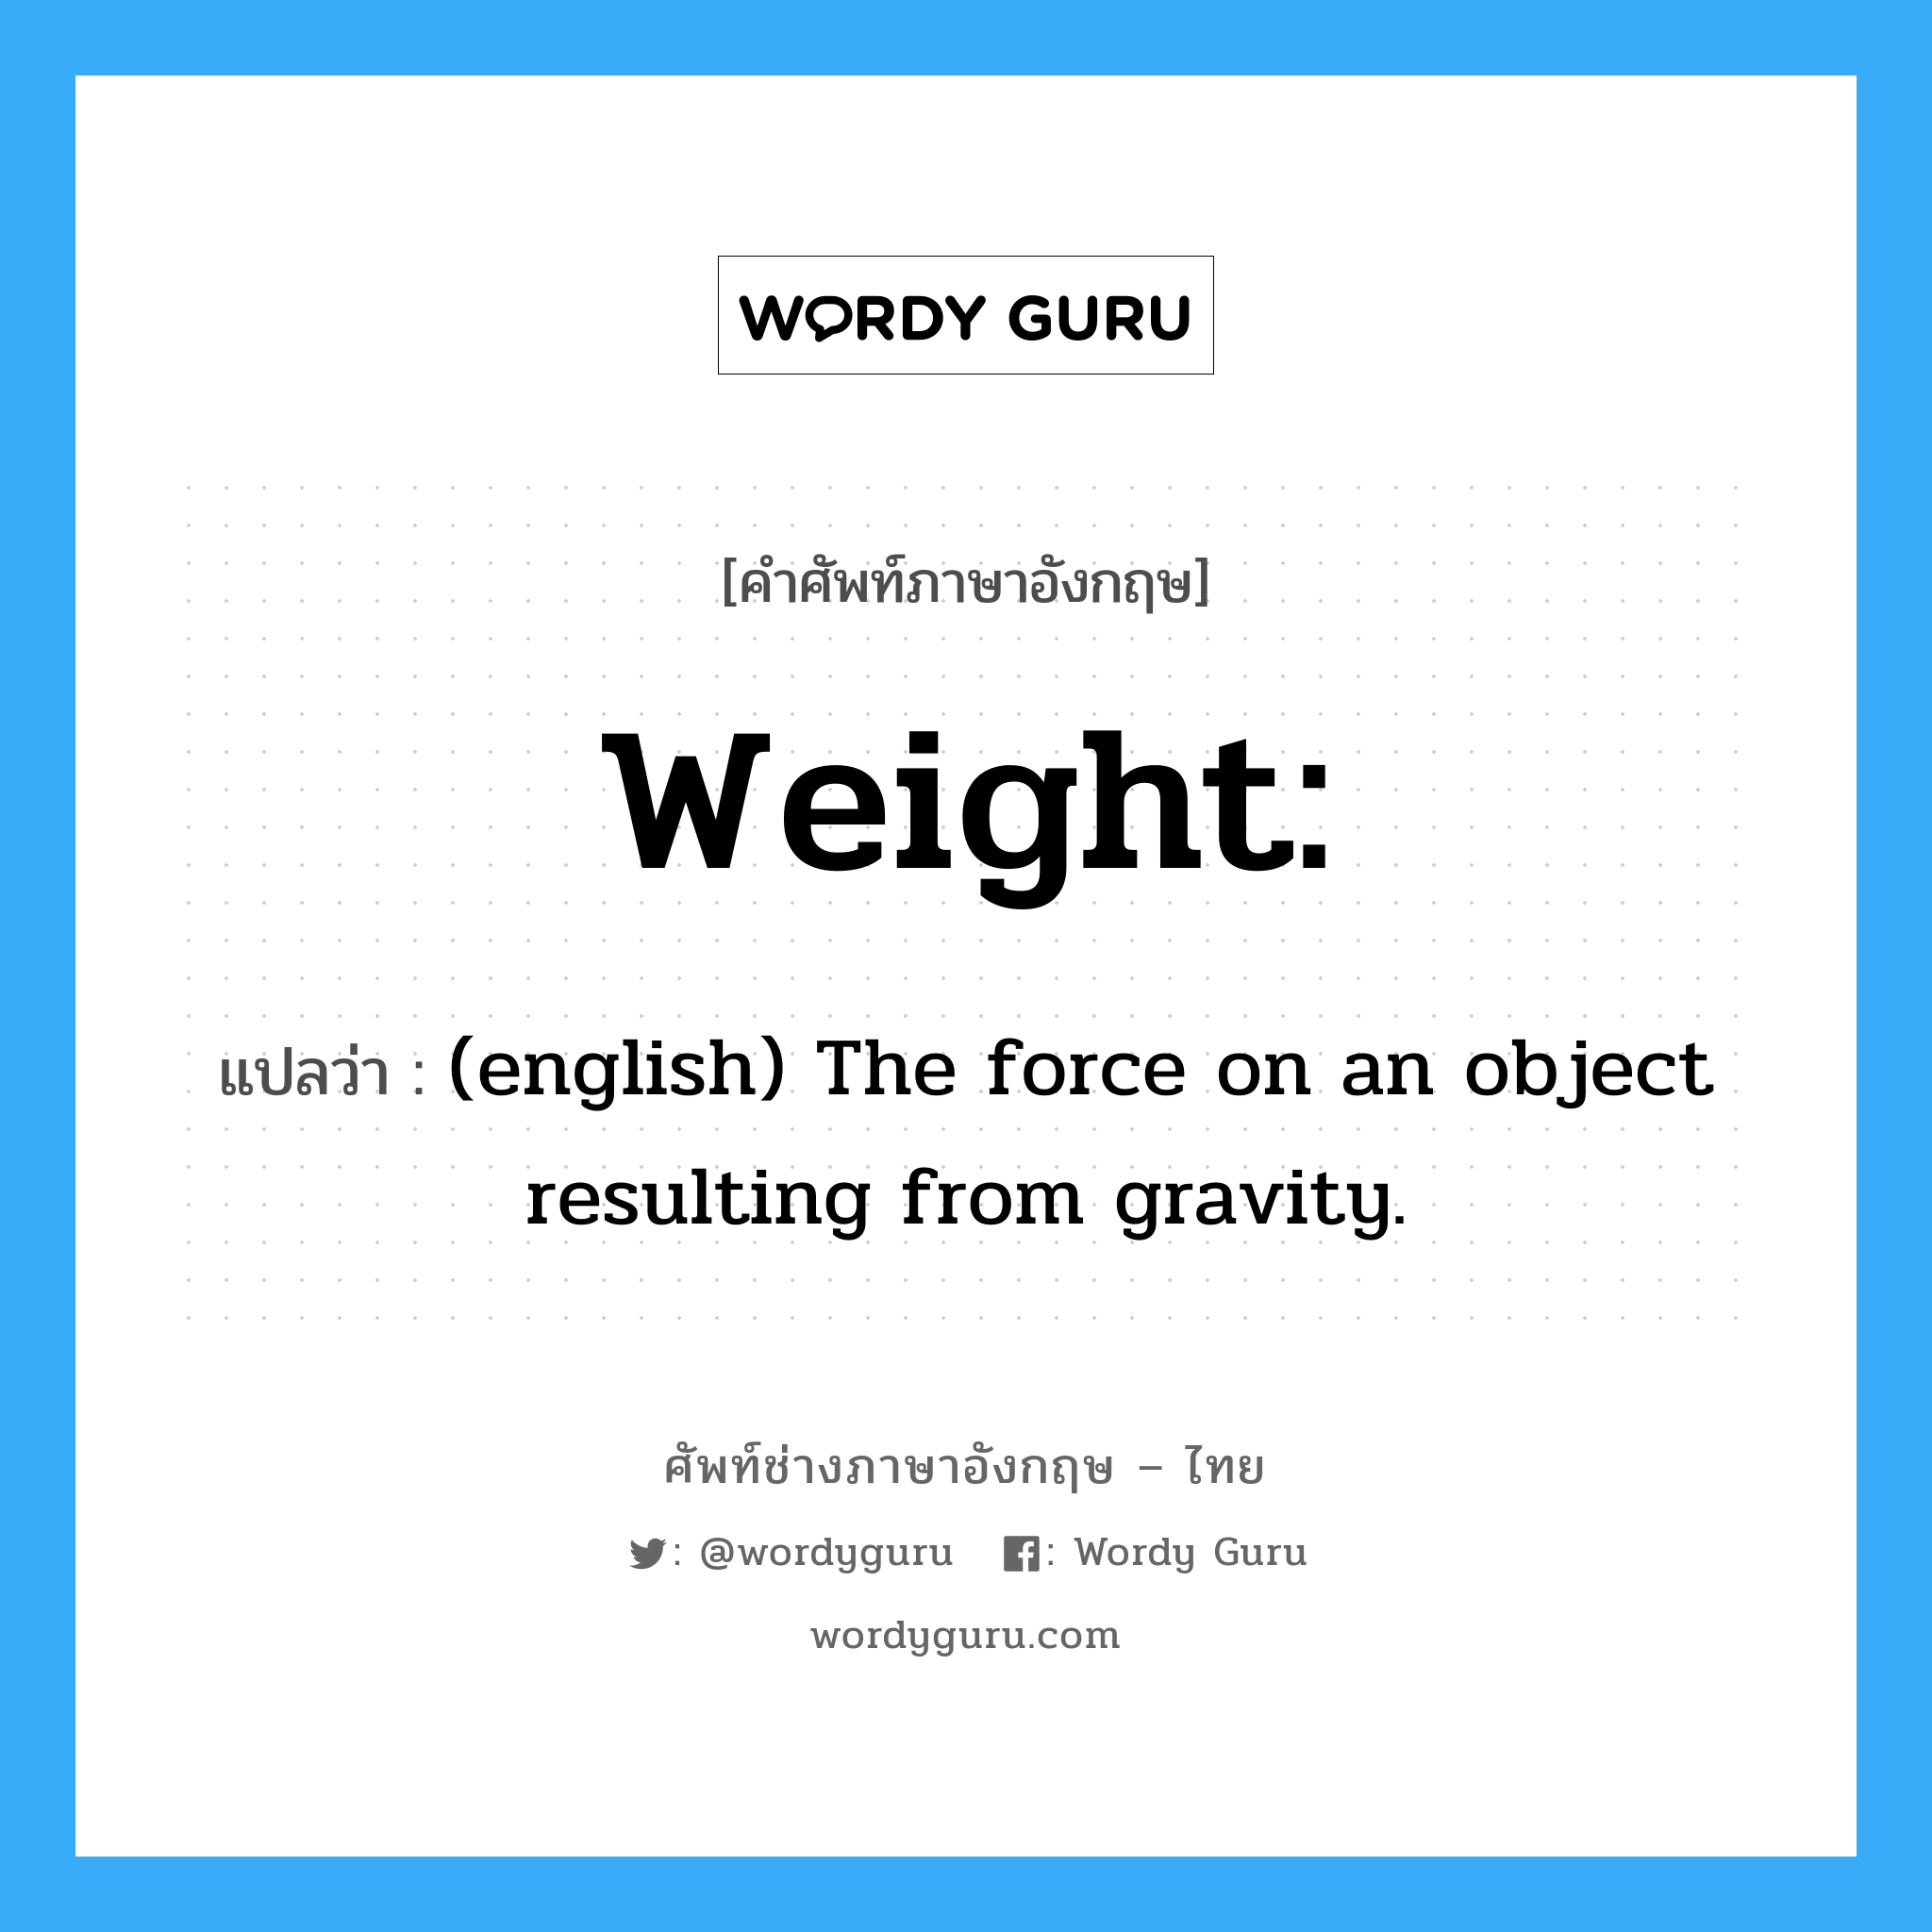 (english) The force on an object resulting from gravity. ภาษาอังกฤษ?, คำศัพท์ช่างภาษาอังกฤษ - ไทย (english) The force on an object resulting from gravity. คำศัพท์ภาษาอังกฤษ (english) The force on an object resulting from gravity. แปลว่า Weight: